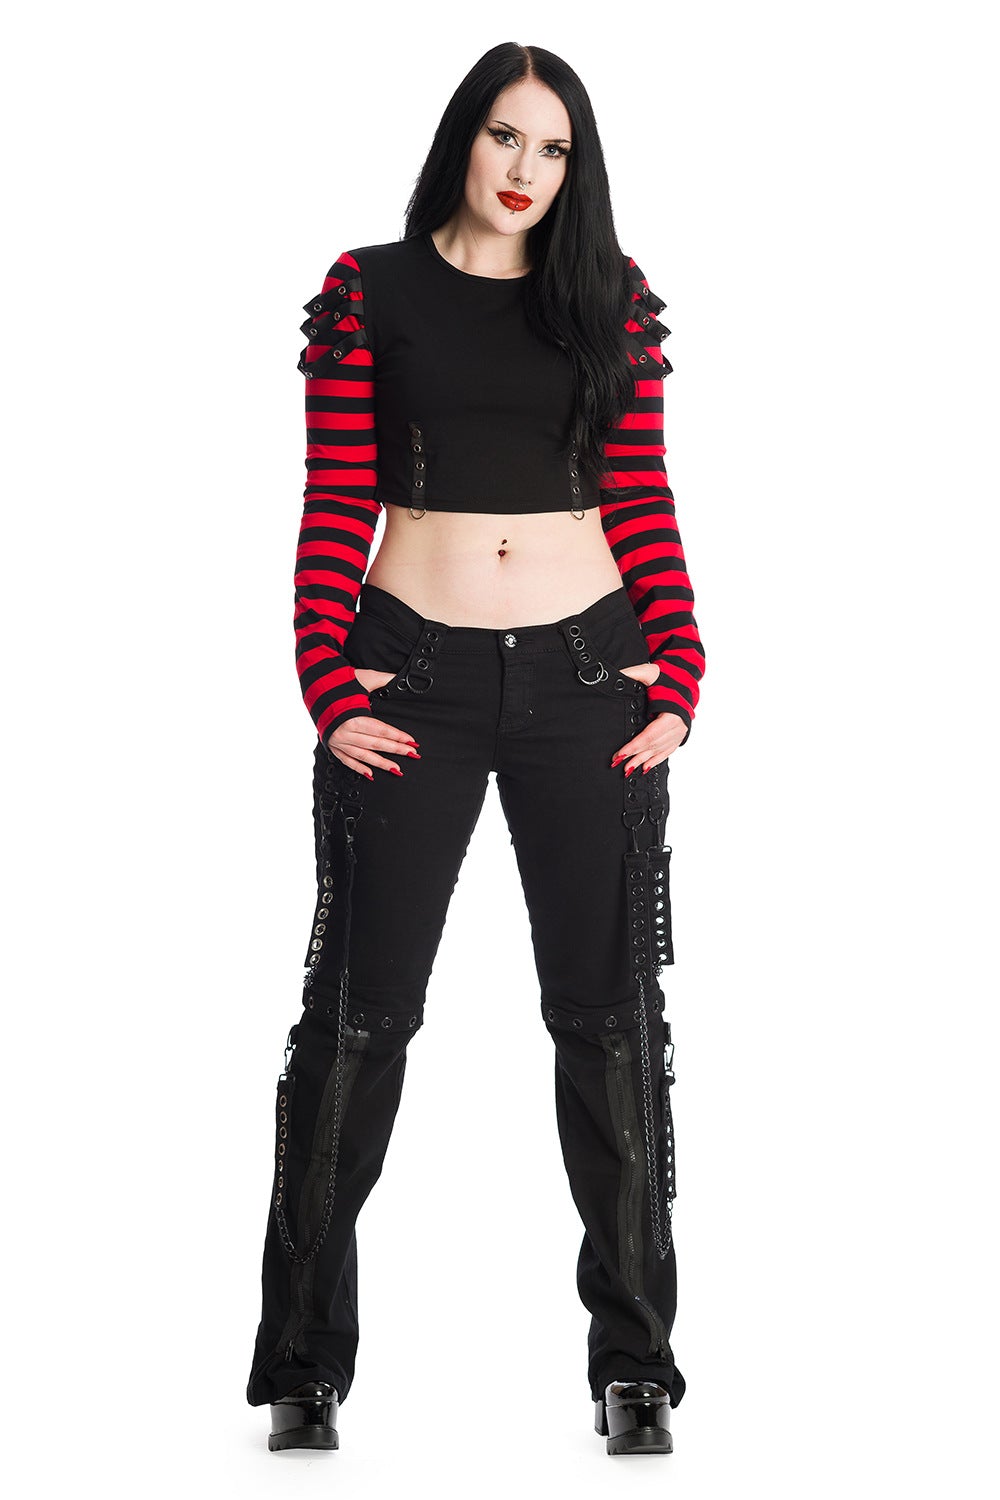 Banned Alternative Hellbound Black Punk Chain Trousers